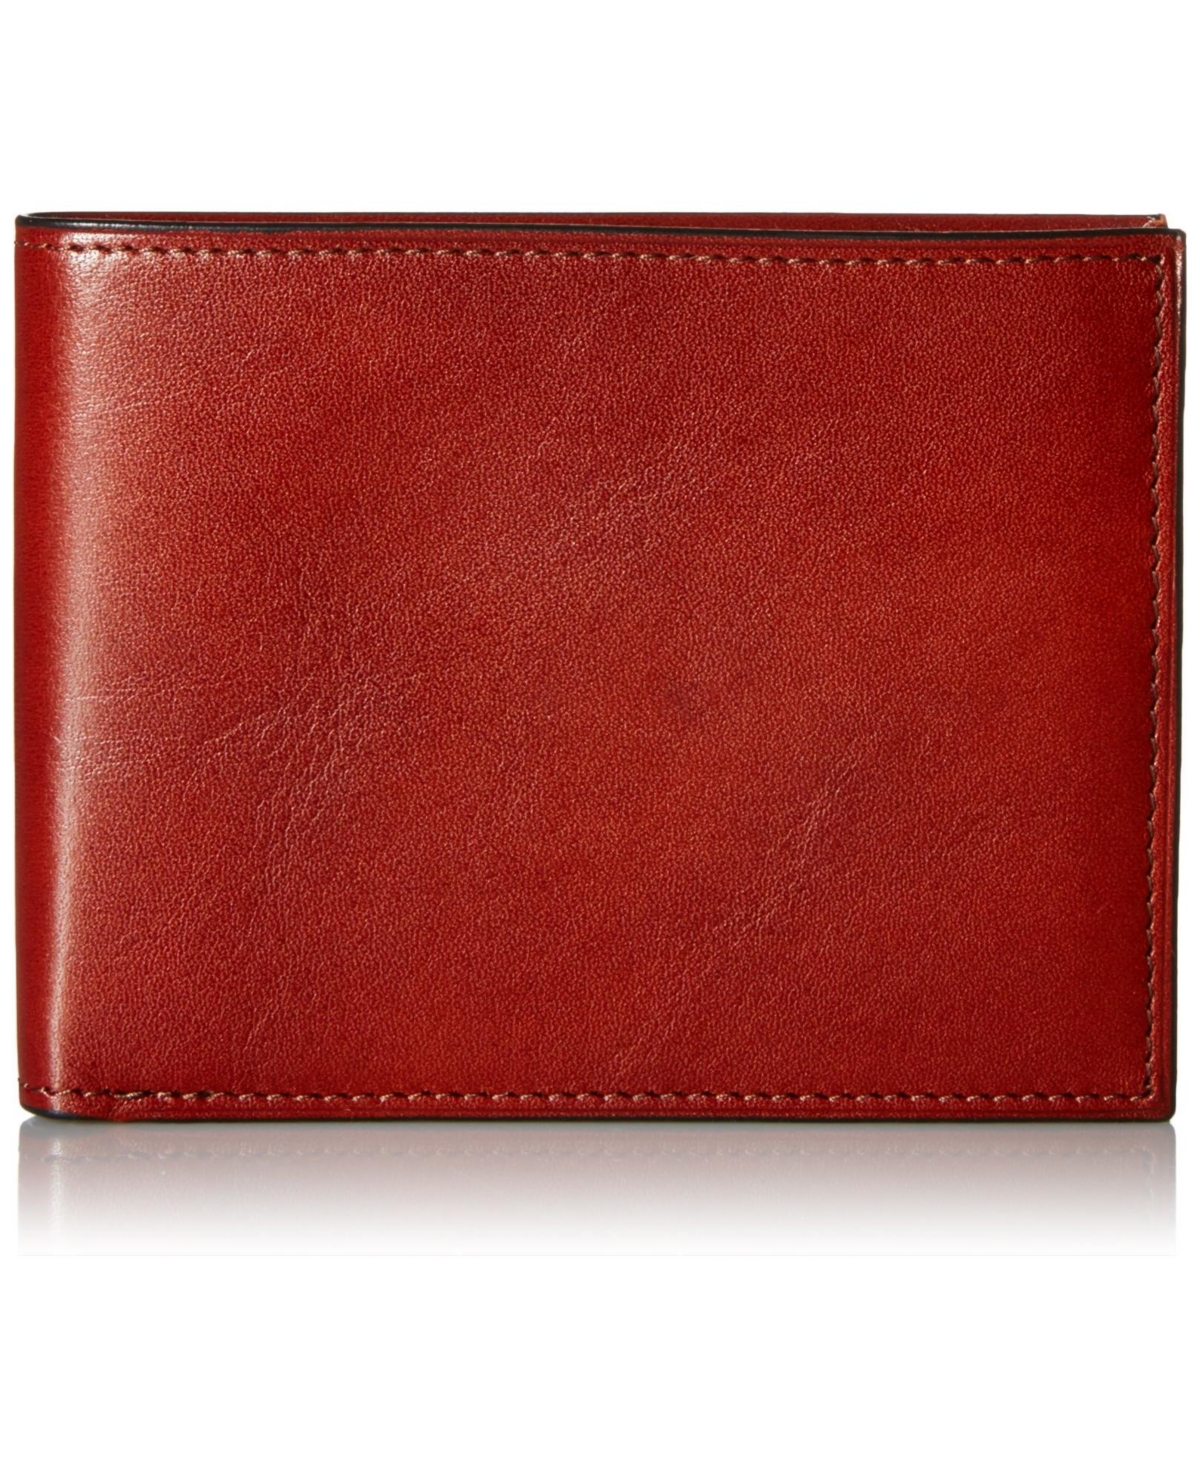 Men's Executive Wallet in Old Leather - Rfid - Cognac brown